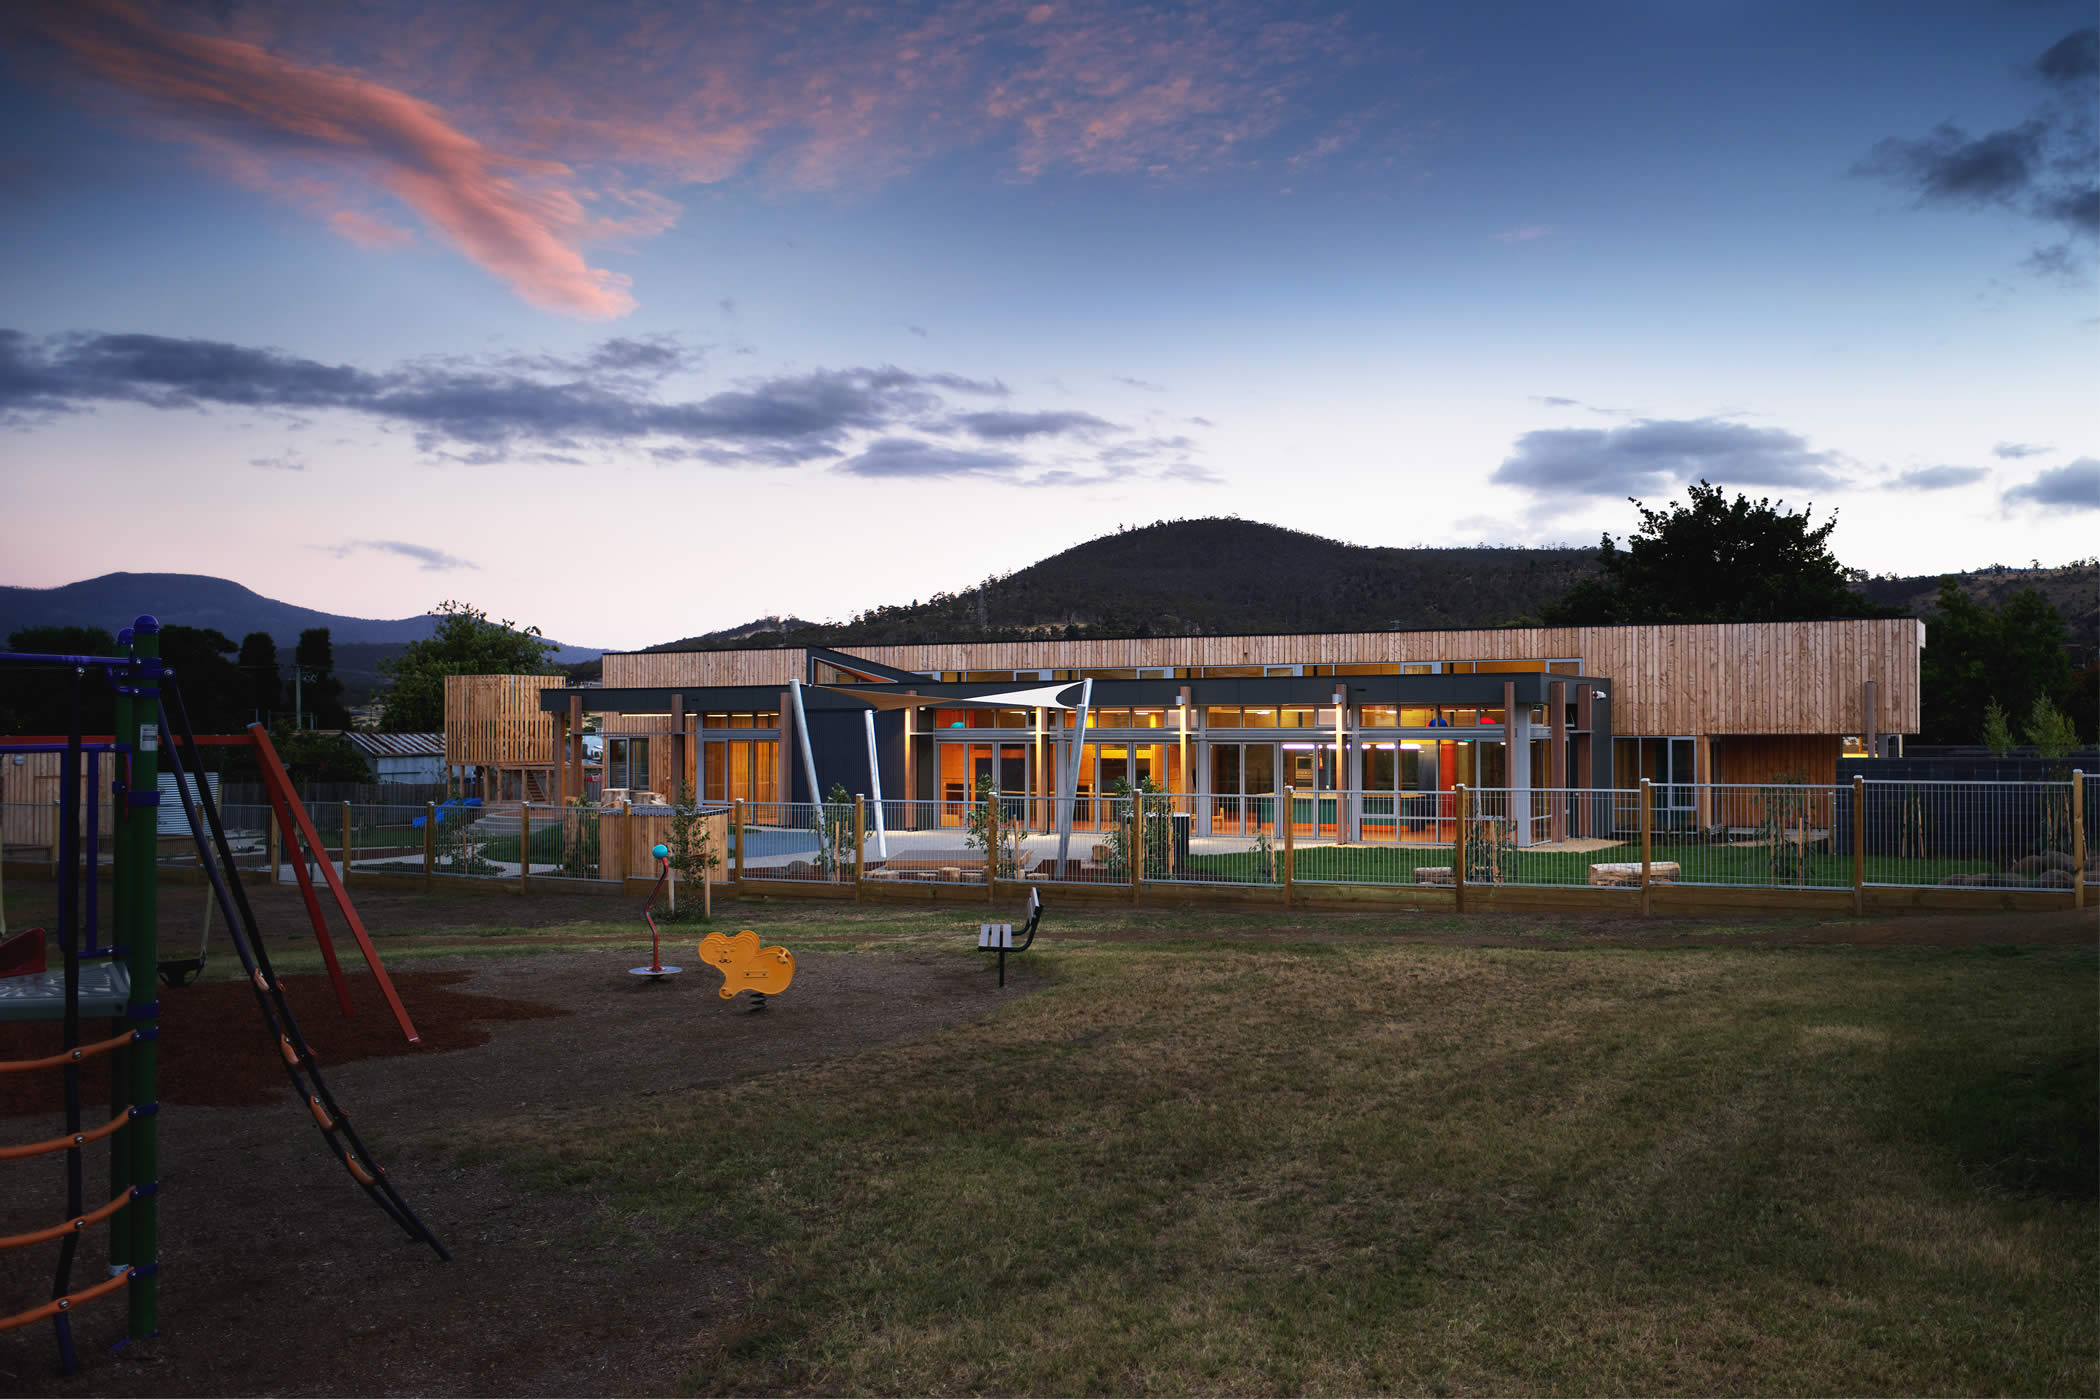 Ptunarra Child and Family Centre, New Norfolk, Tasmania: Passive solar design opens to and brings warm northern light in with passive surveillance, improved safety and use of the adjacent park forging social renewal in the area. Photo by Ray Joyce.